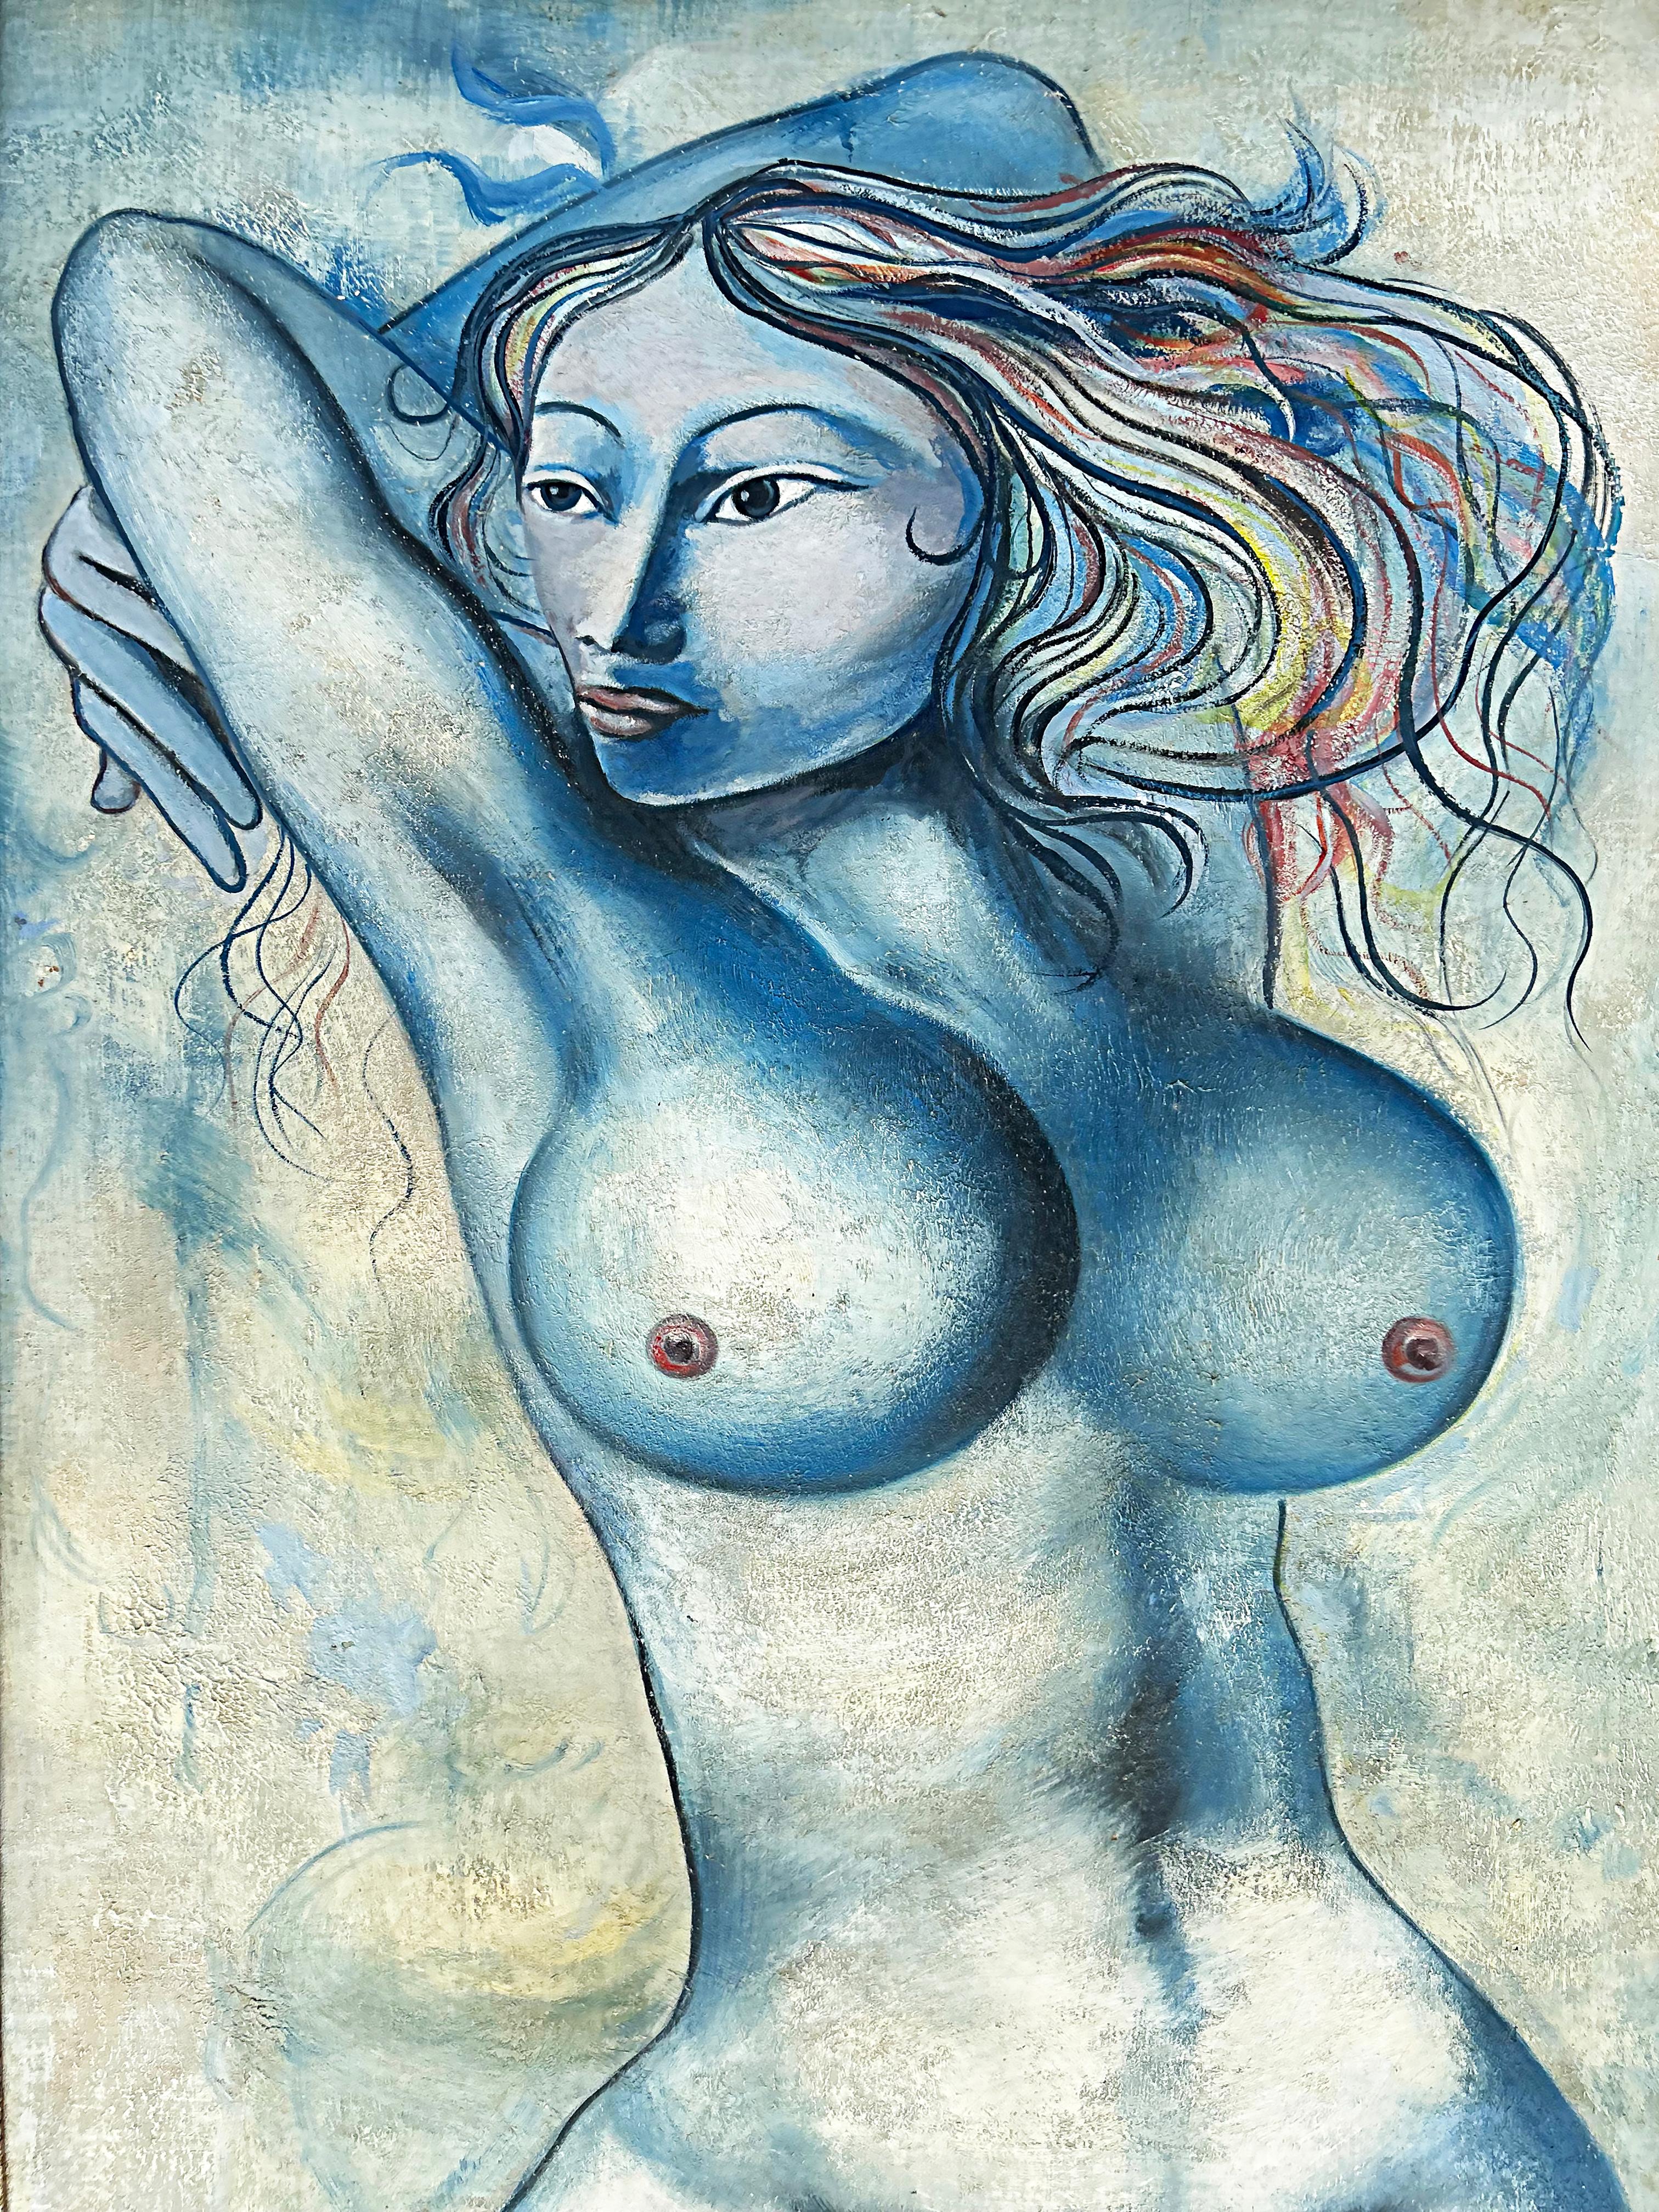 Servando Cabrera Moreno Cuban Painting Untitled, Desnudo COA signed, dated 1980

Offered for sale is an original oil on canvas by Servando Cabrera Moreno (Cuban, 1923-1981) untitled painting of a nude woman, nicely framed, signed lower left and on